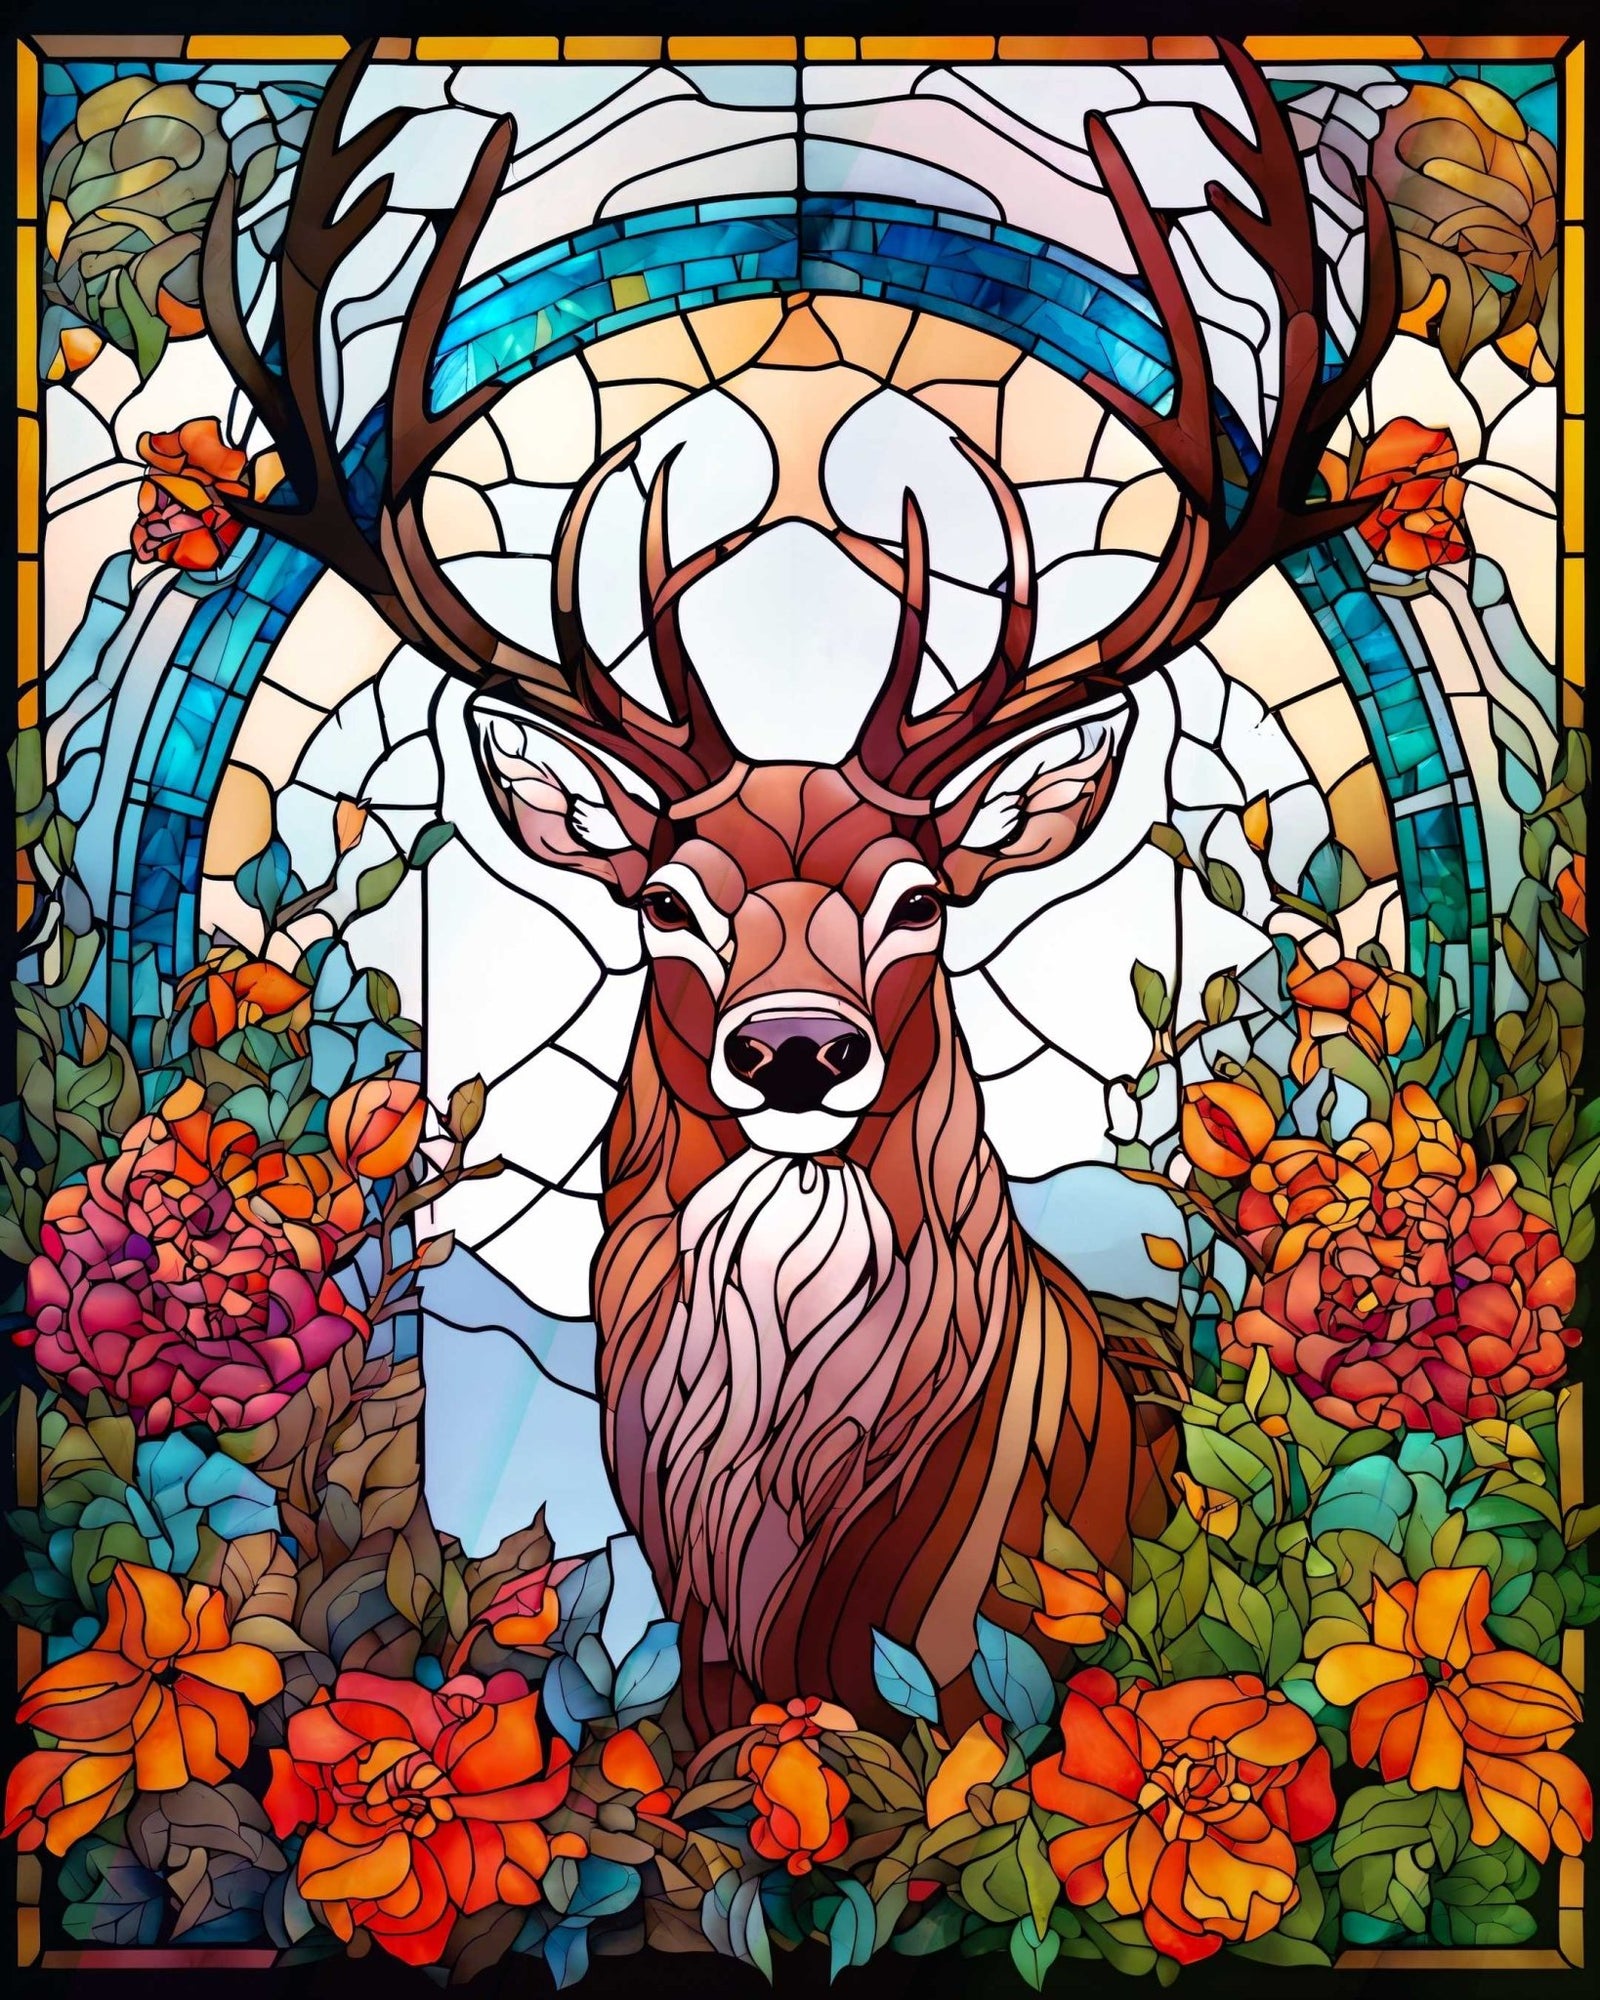 Blooming stag - Poster - Ever colorful